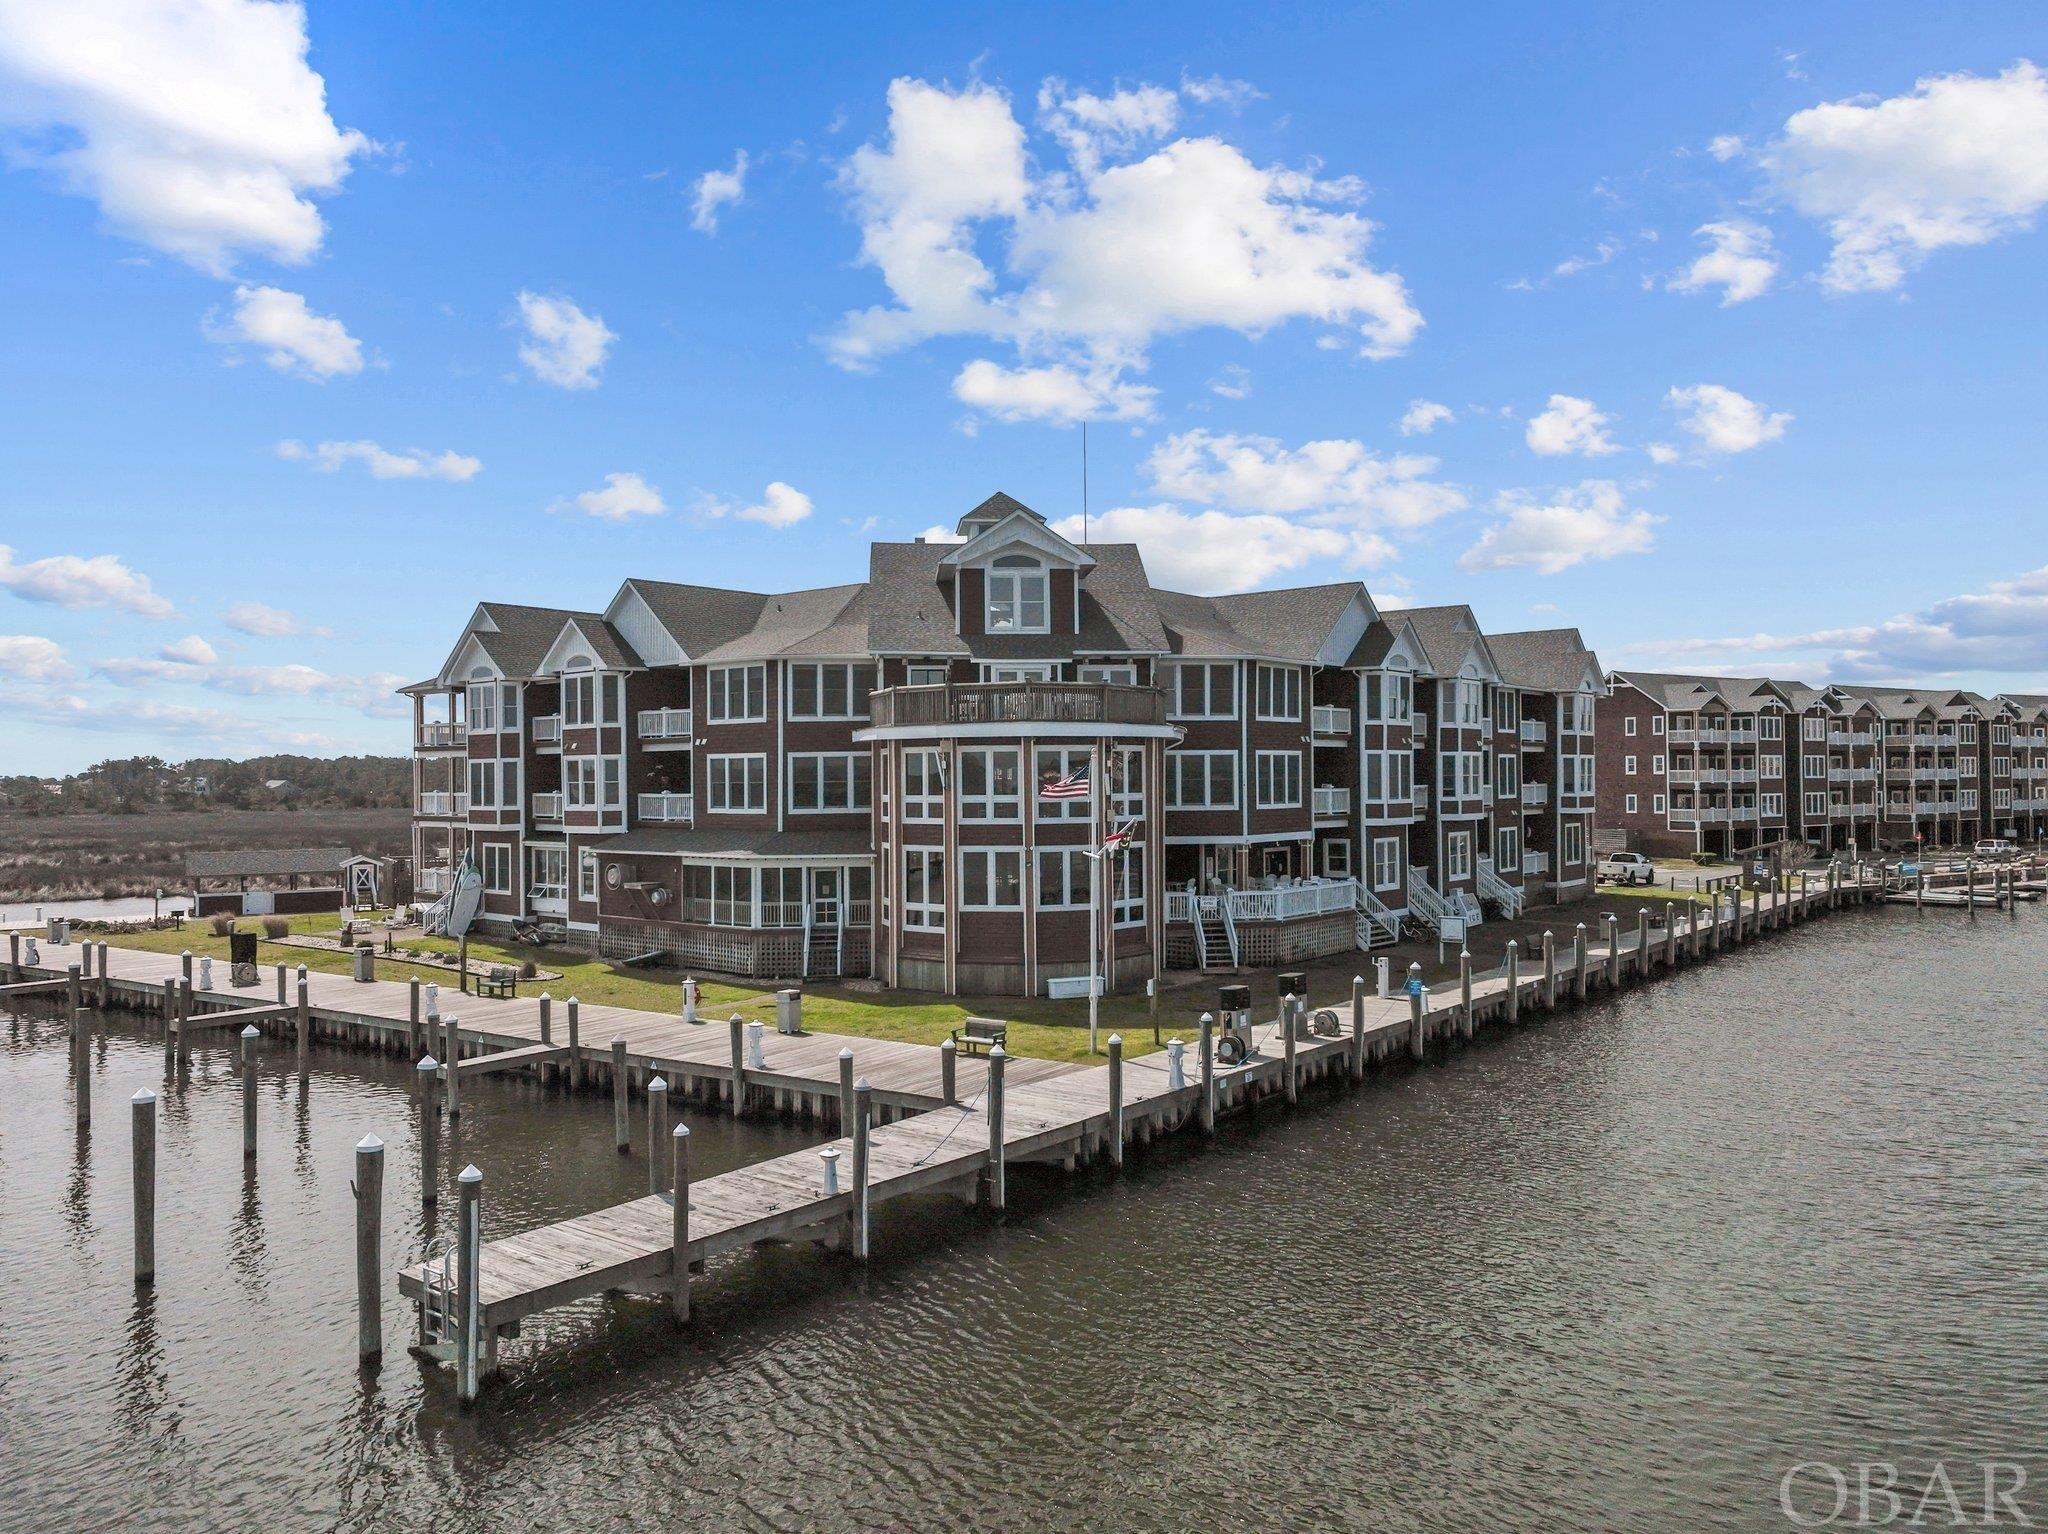 1103 South Bay Club Drive, Manteo, NC 27954, 1 Bedroom Bedrooms, ,1 BathroomBathrooms,Residential,For sale,South Bay Club Drive,124731